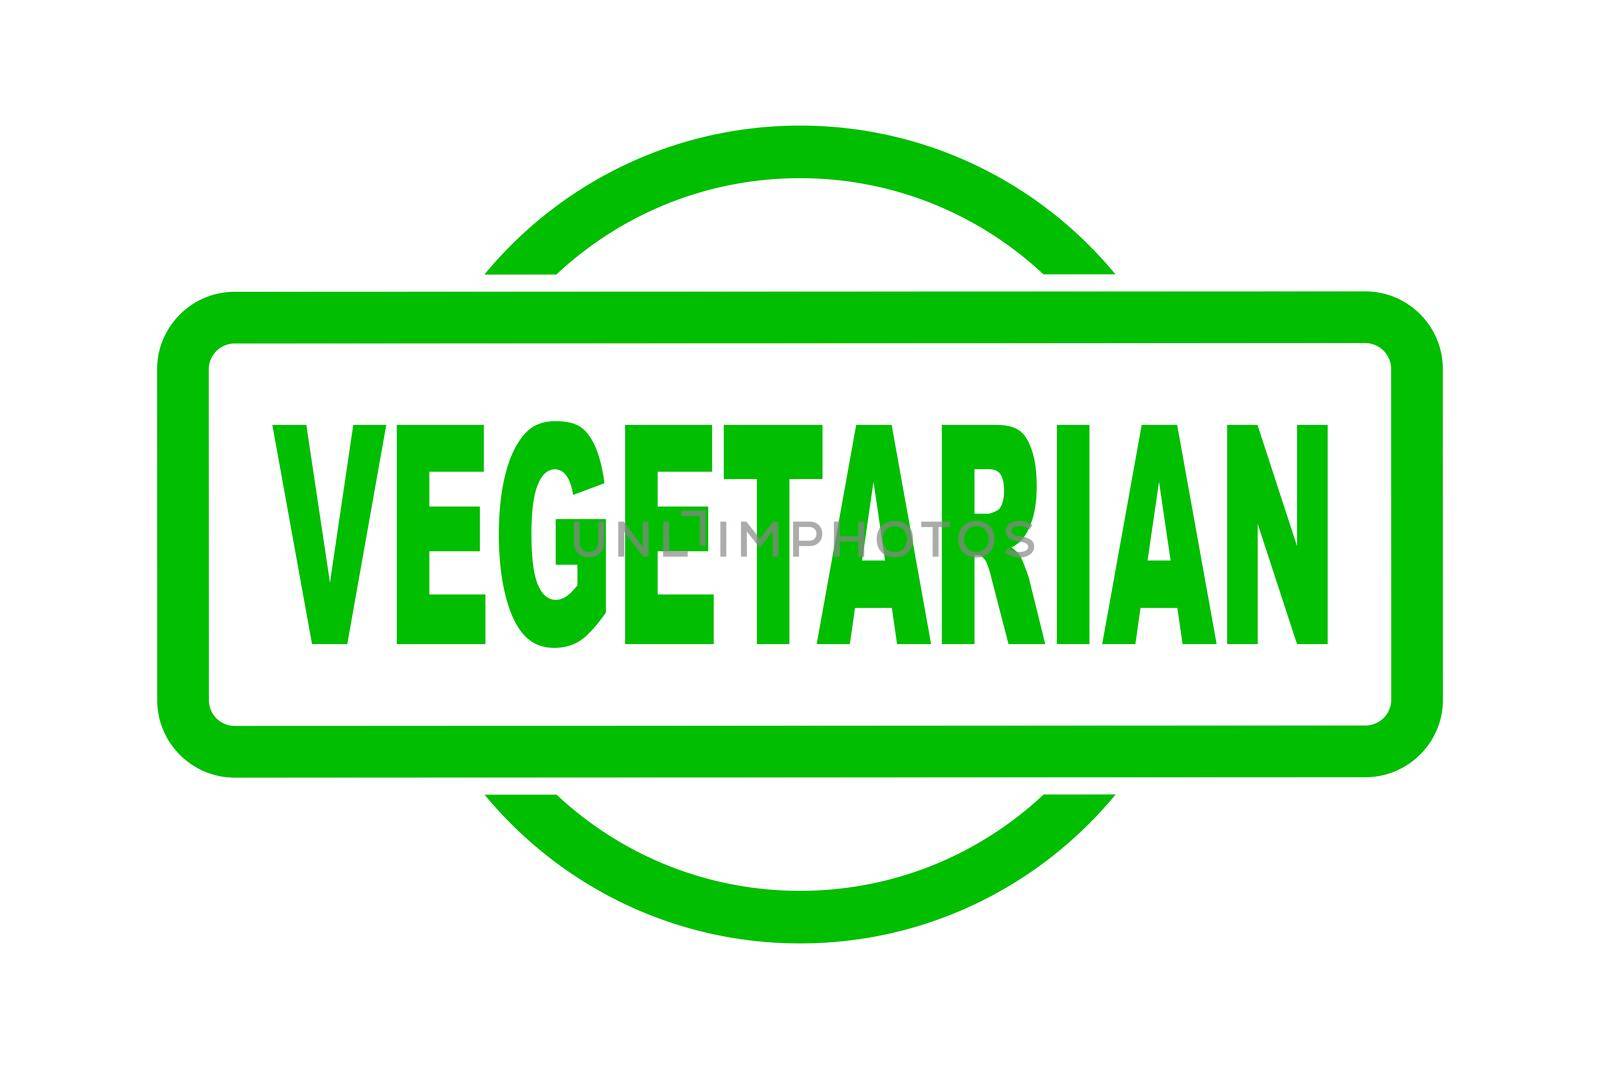 An vegitarian rubber stamp in green over a white background